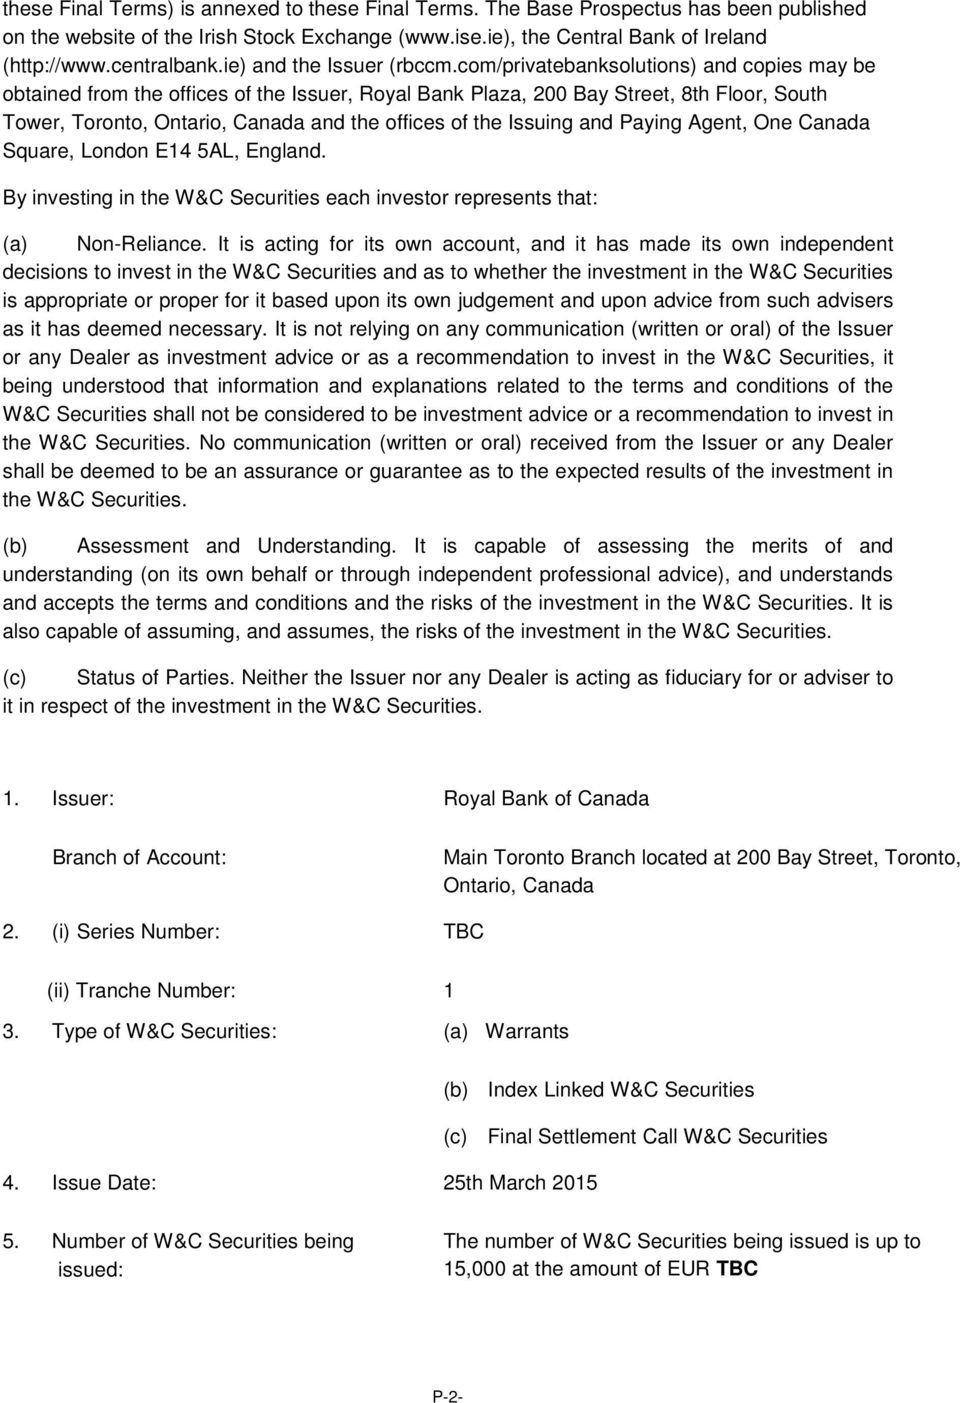 com/privatebanksolutions) and copies may be obtained from the offices of the Issuer, Royal Bank Plaza, 200 Bay Street, 8th Floor, South Tower, Toronto, Ontario, Canada and the offices of the Issuing